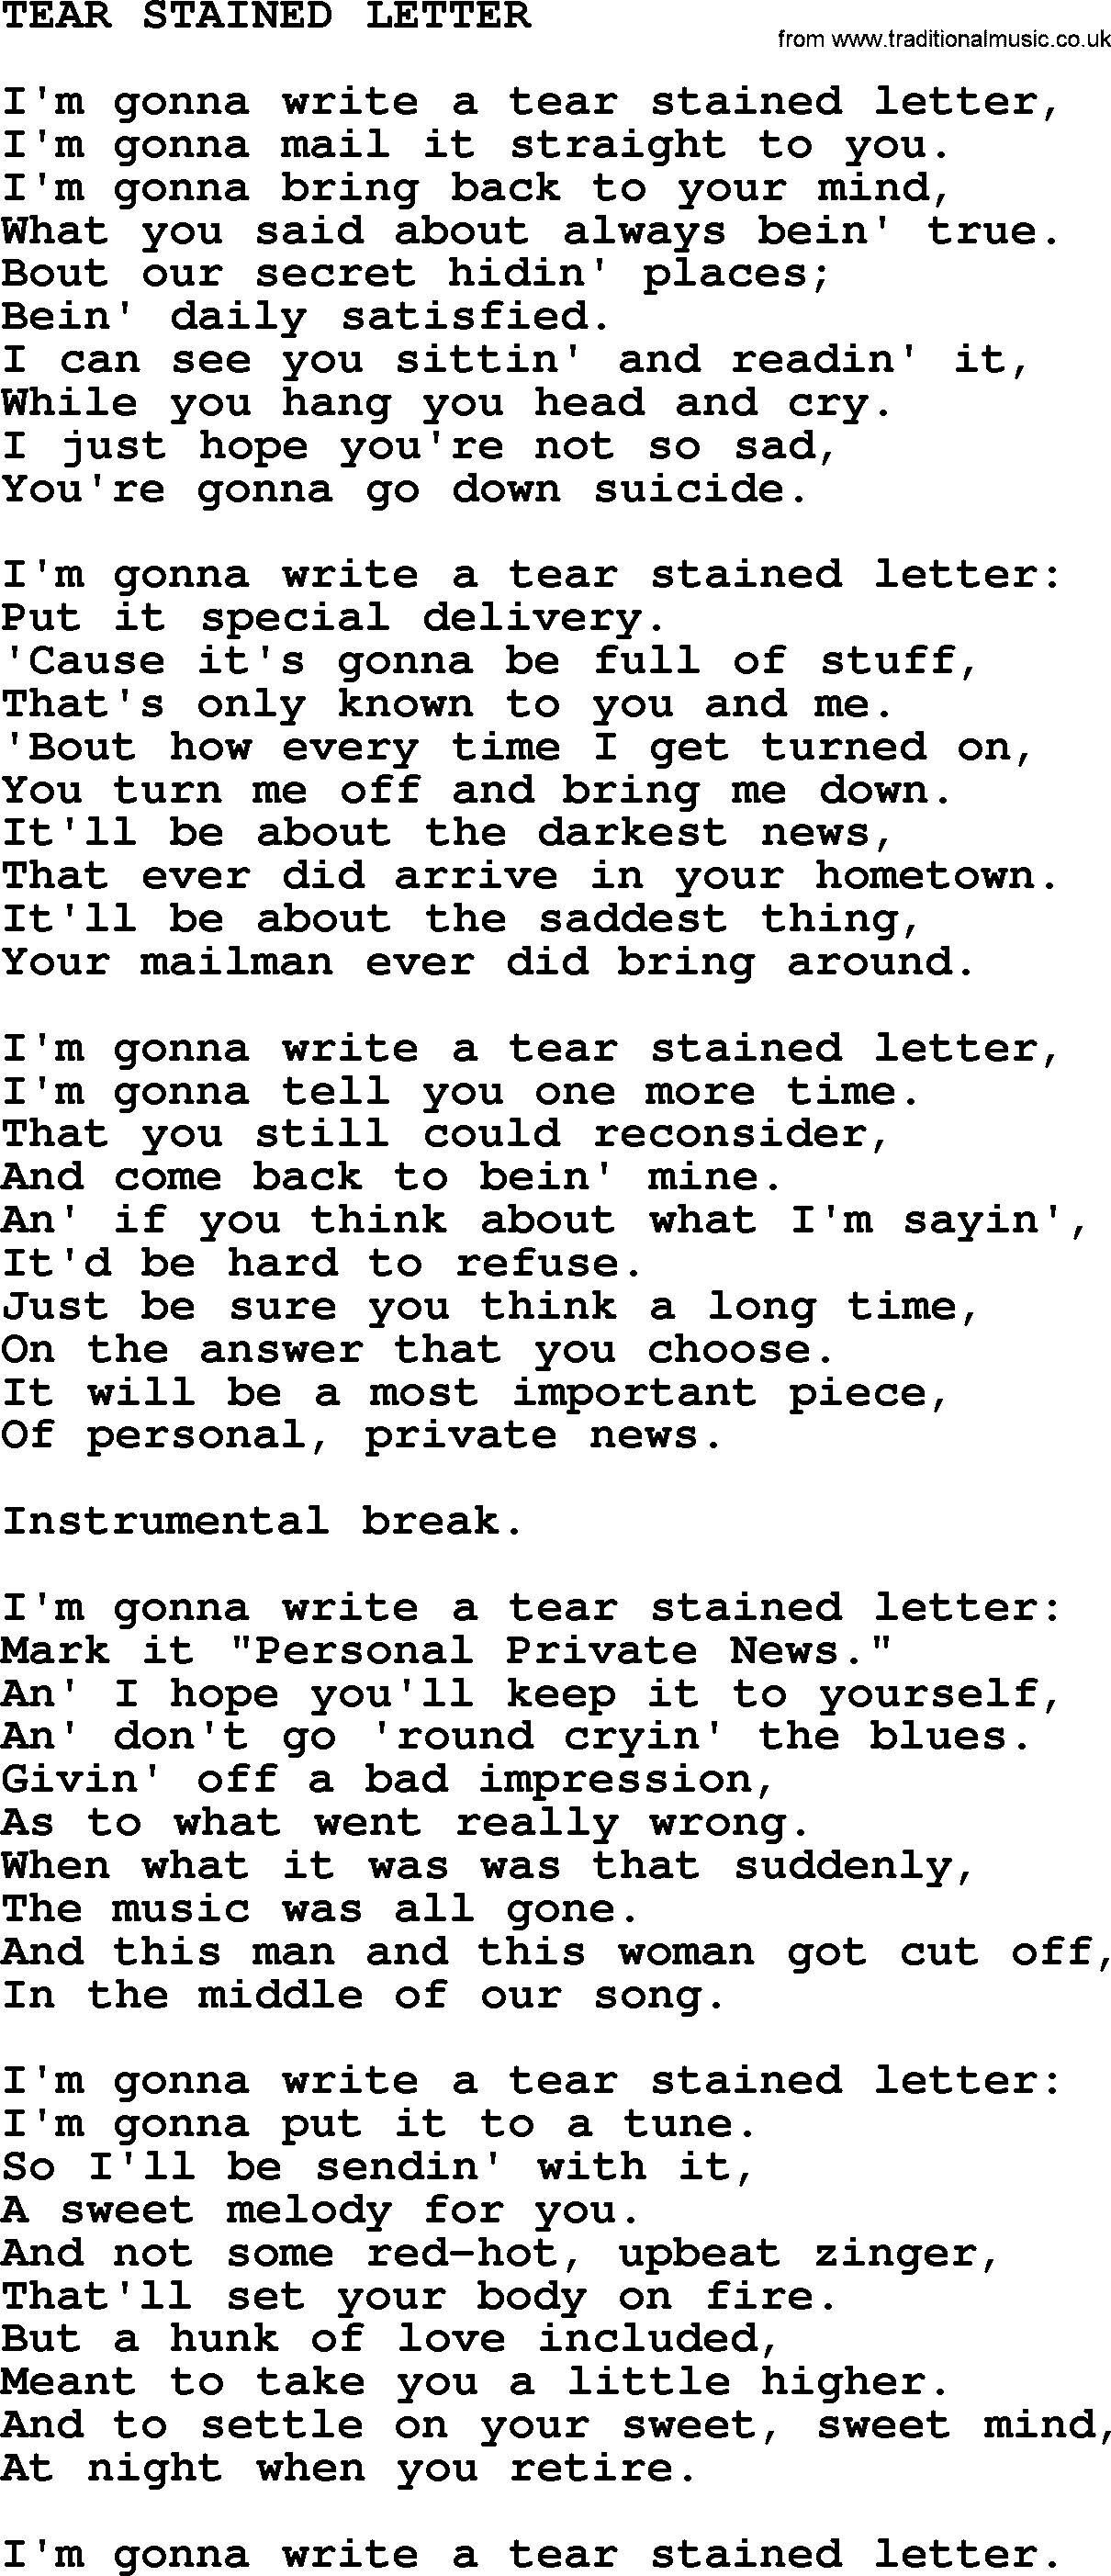 Johnny Cash song Tear Stained Letter.txt lyrics